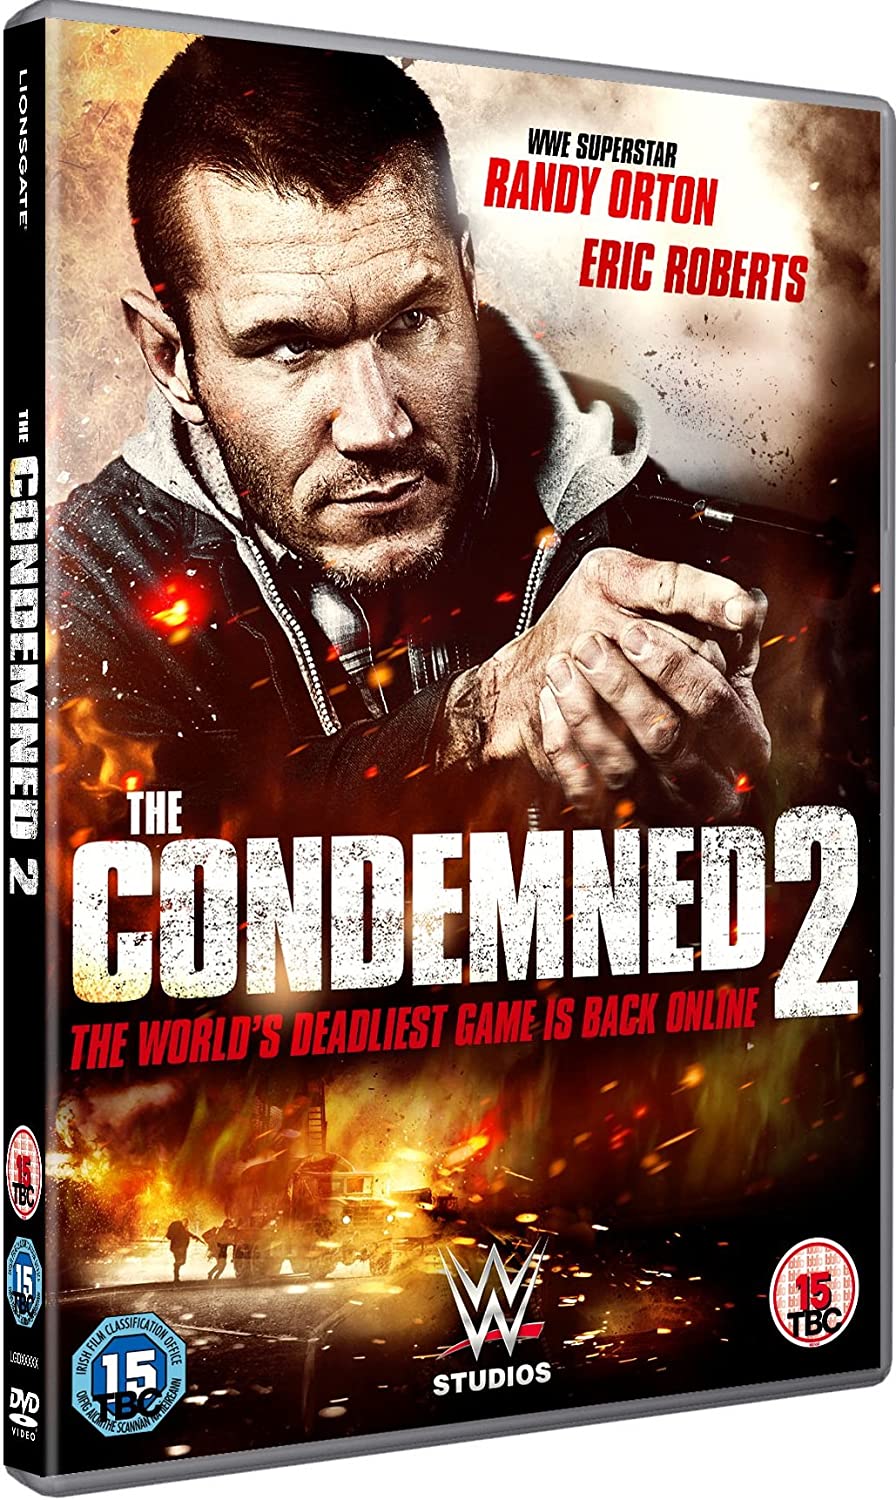 The Condemned 2 - Action/Thriller [DVD]